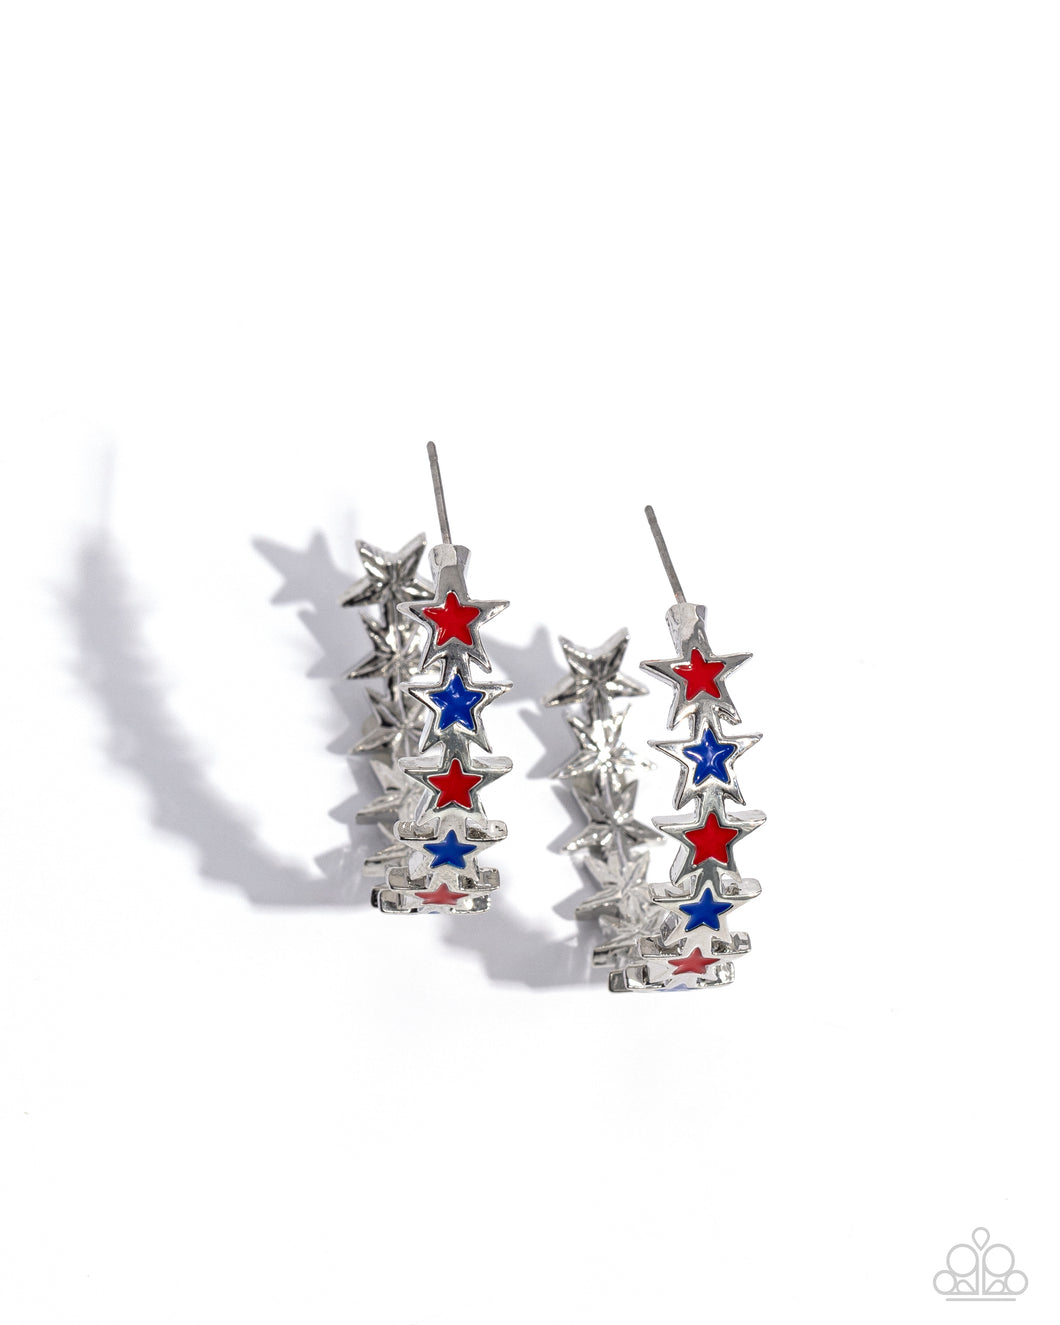 oak-sisters-jewelry-star-spangled-statement-paparazzi-accessories-by-lisa